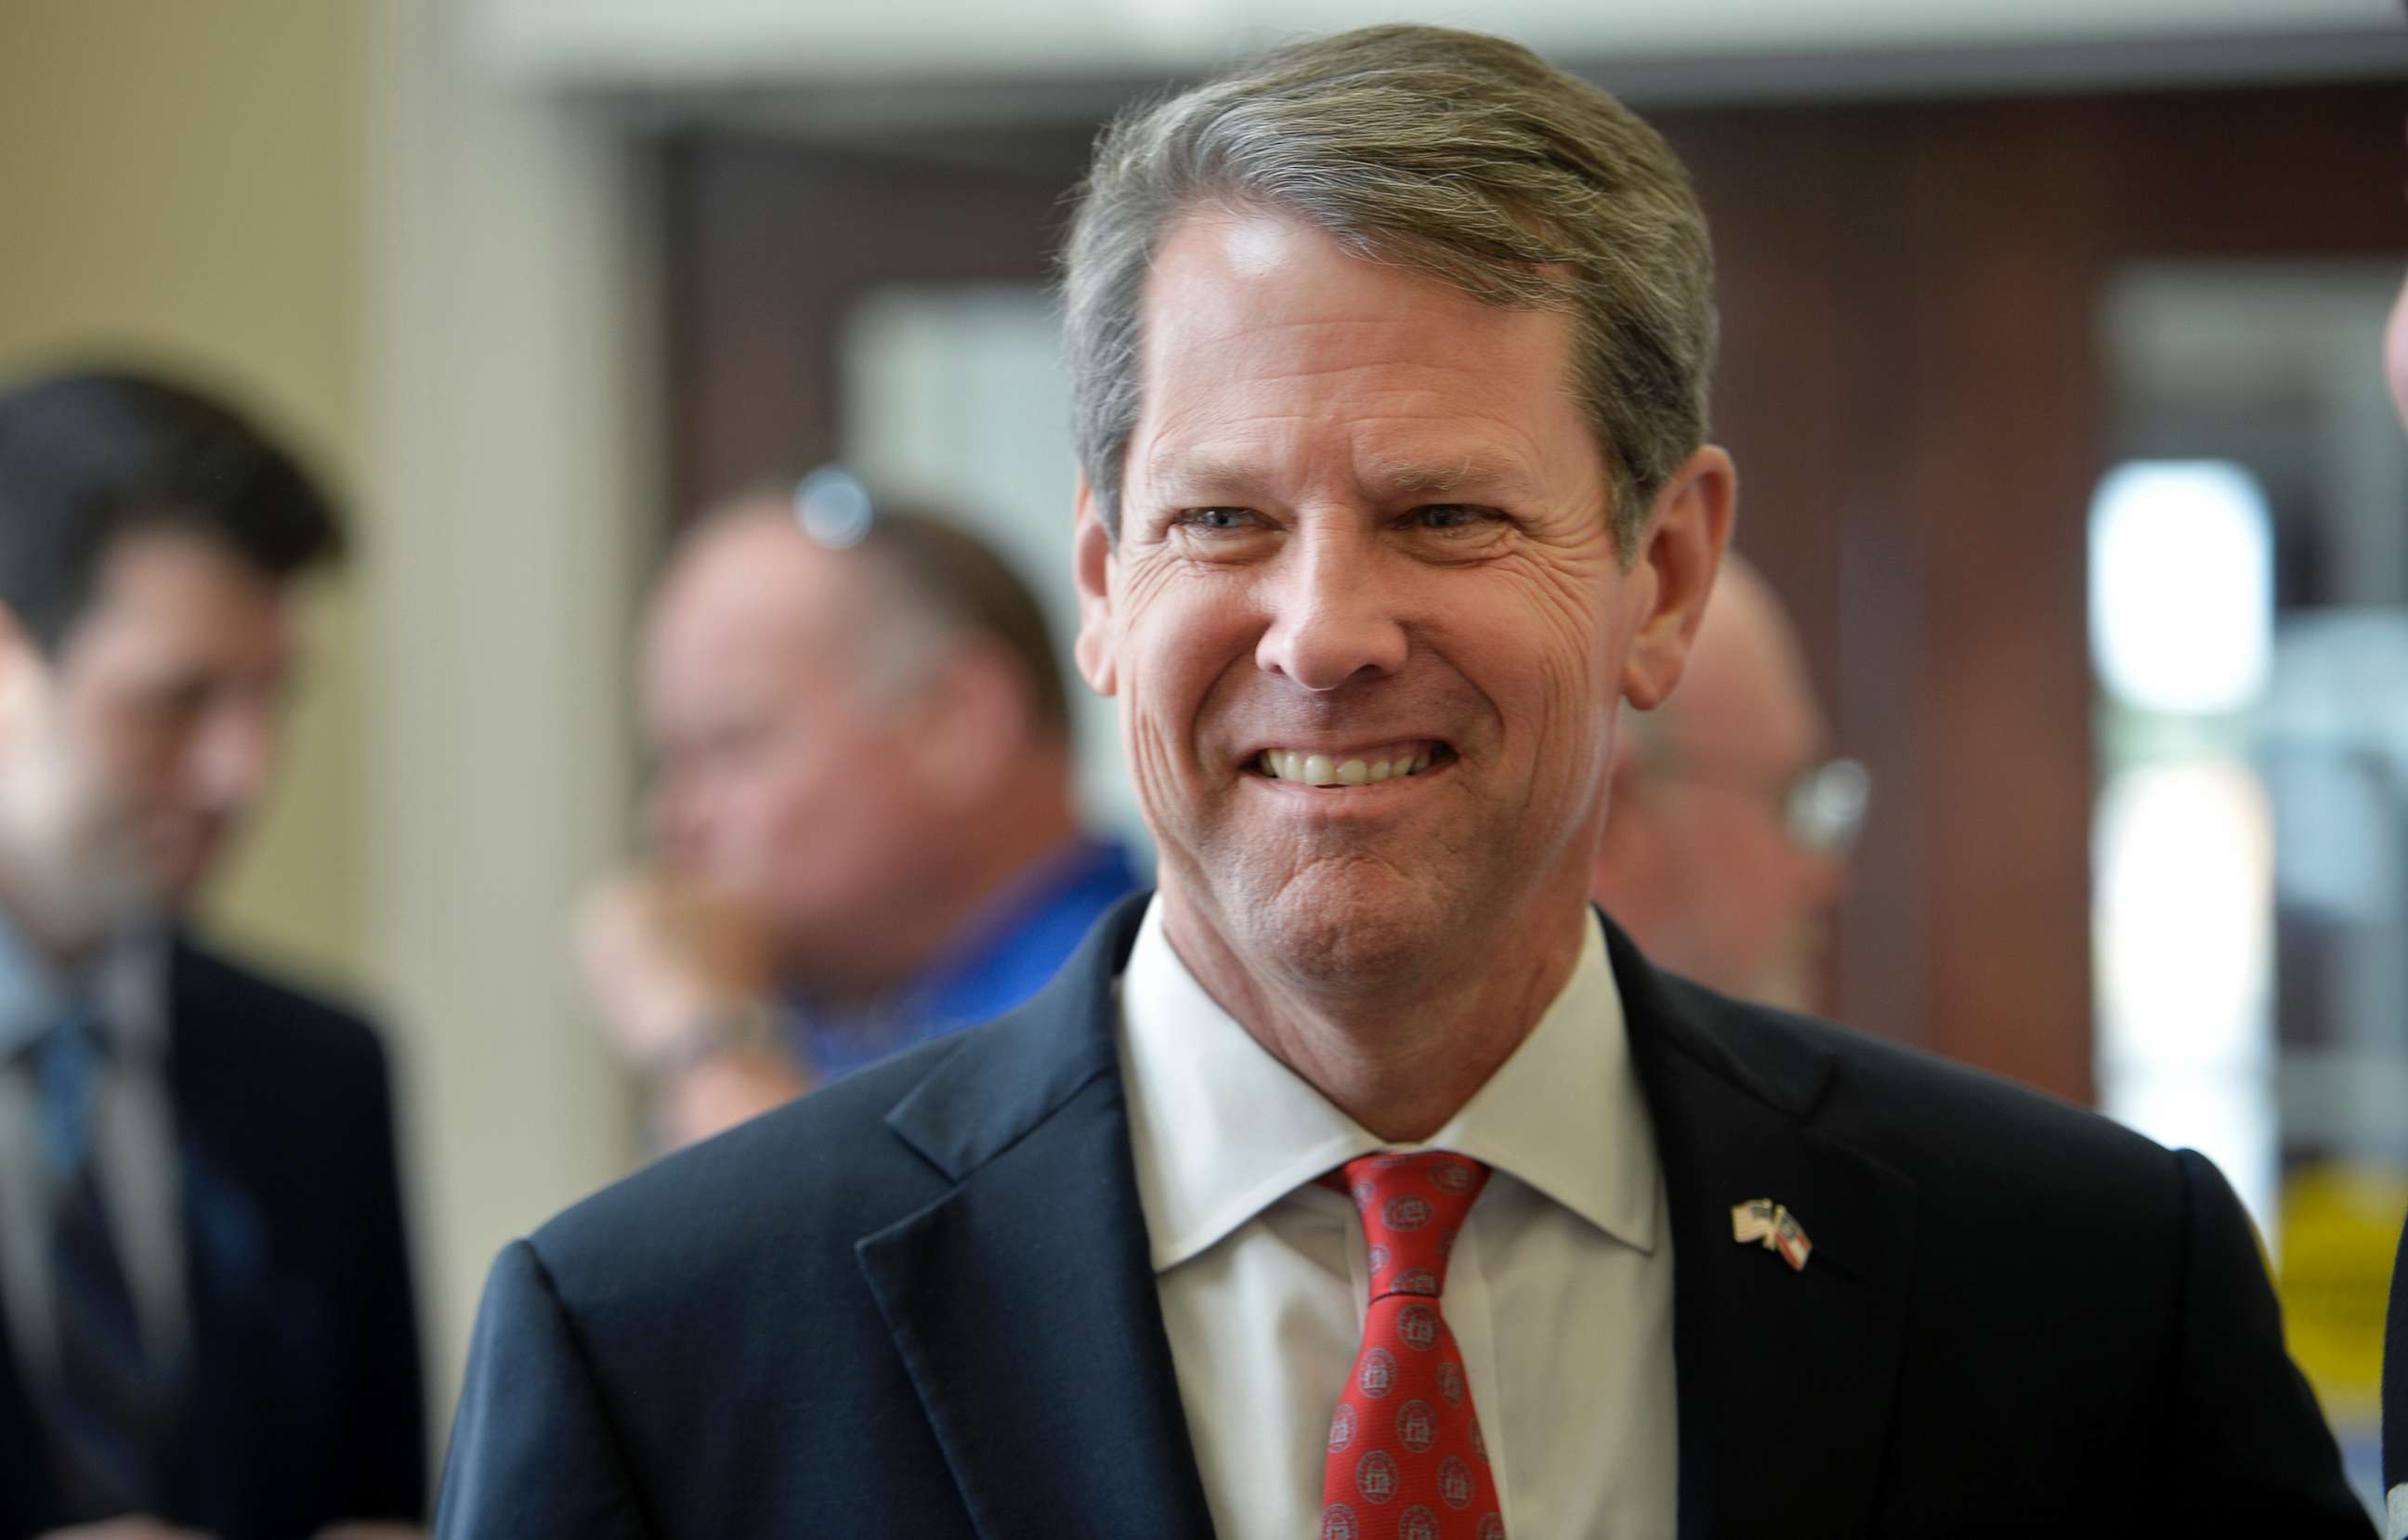 PHOTO: Georgia Secretary of State Brian Kemp talks to voters during a rally in Augusta, Ga., July 23, 2018.